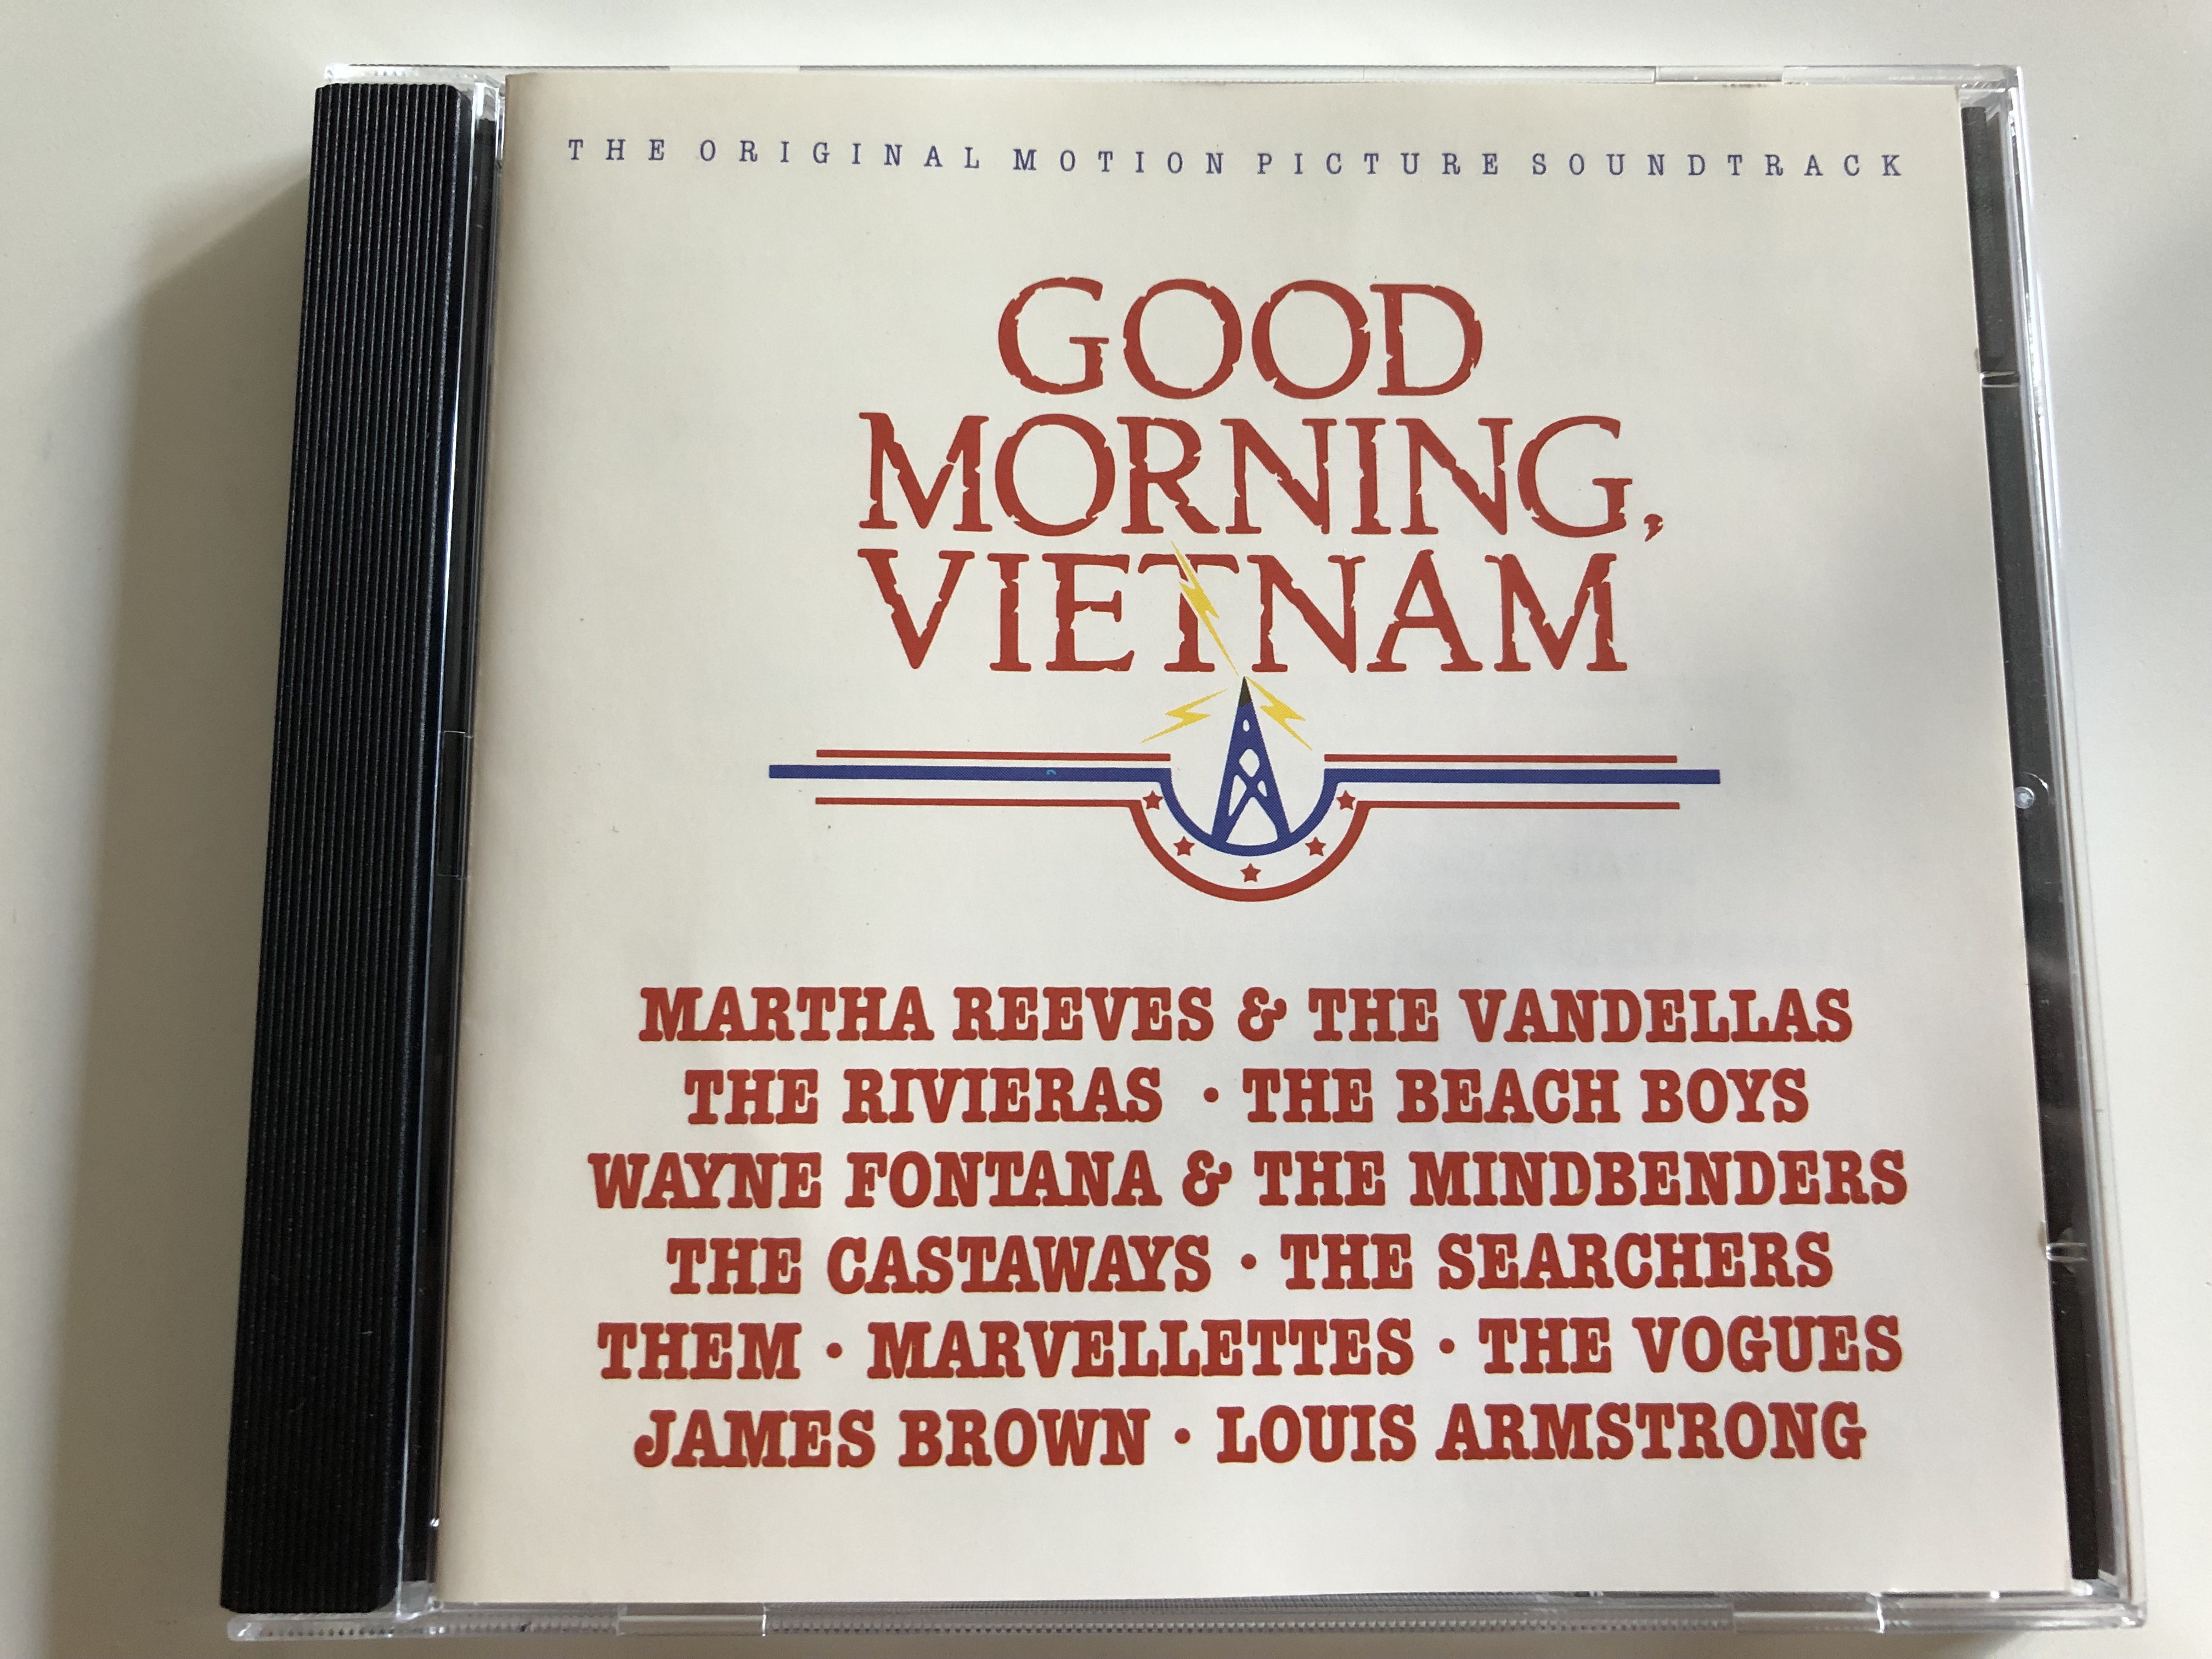 good-morning-vietnam-the-original-motion-picture-soundtrack-the-rivieras-the-beach-boys-the-castaways-them-the-vogues-james-brown-audio-cd-1988-1-.jpg